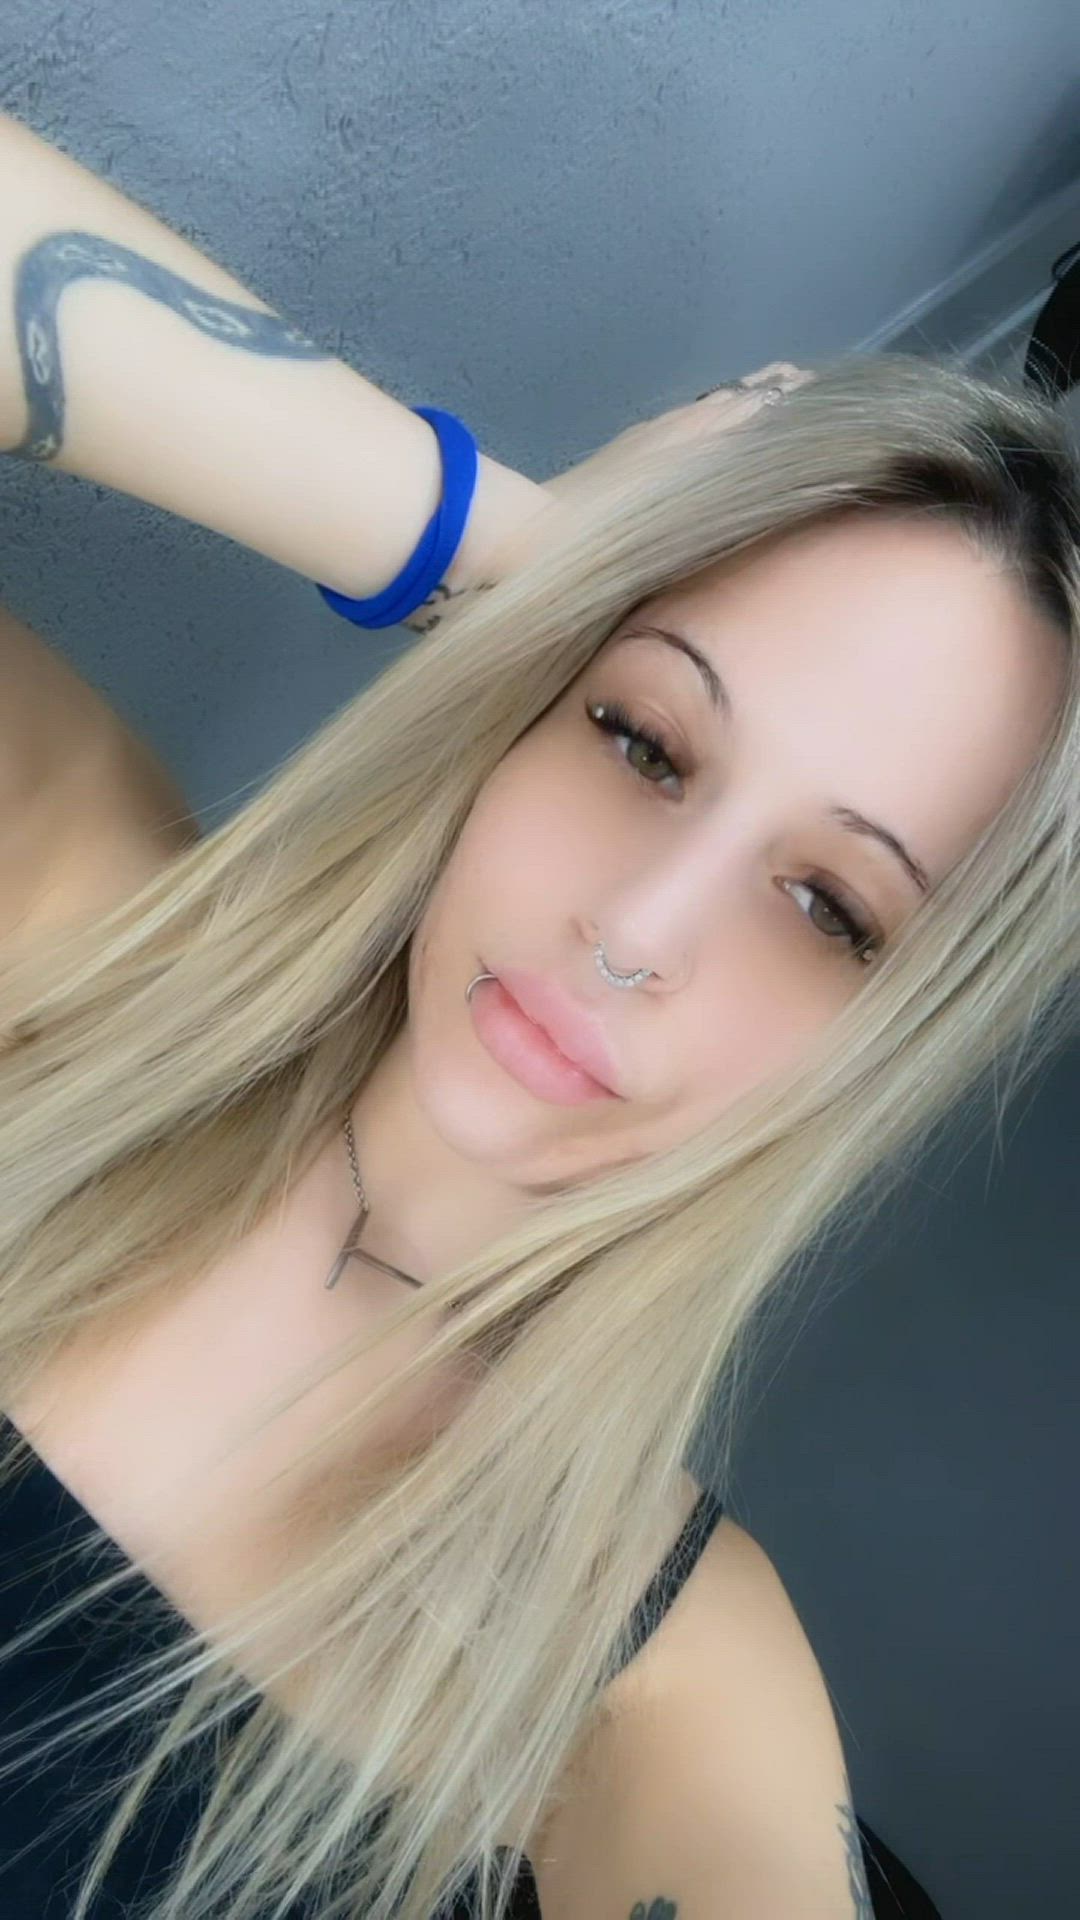 Pussy porn video with onlyfans model Baby princess <strong>@babyprincesxxxx</strong>